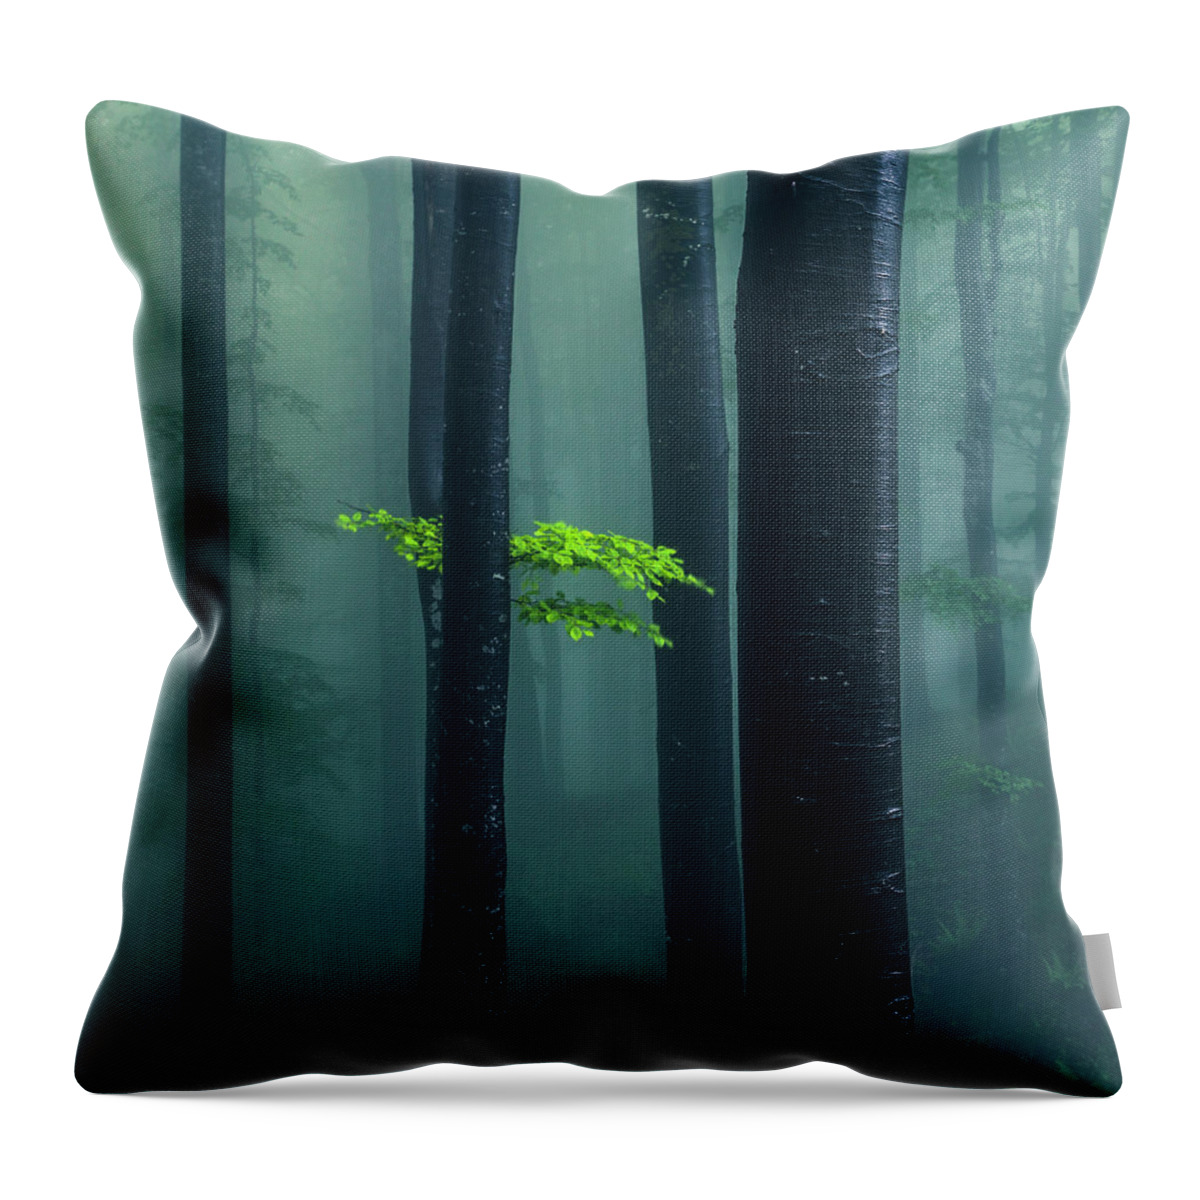 Mountain Throw Pillow featuring the photograph Bit Of Green by Evgeni Dinev